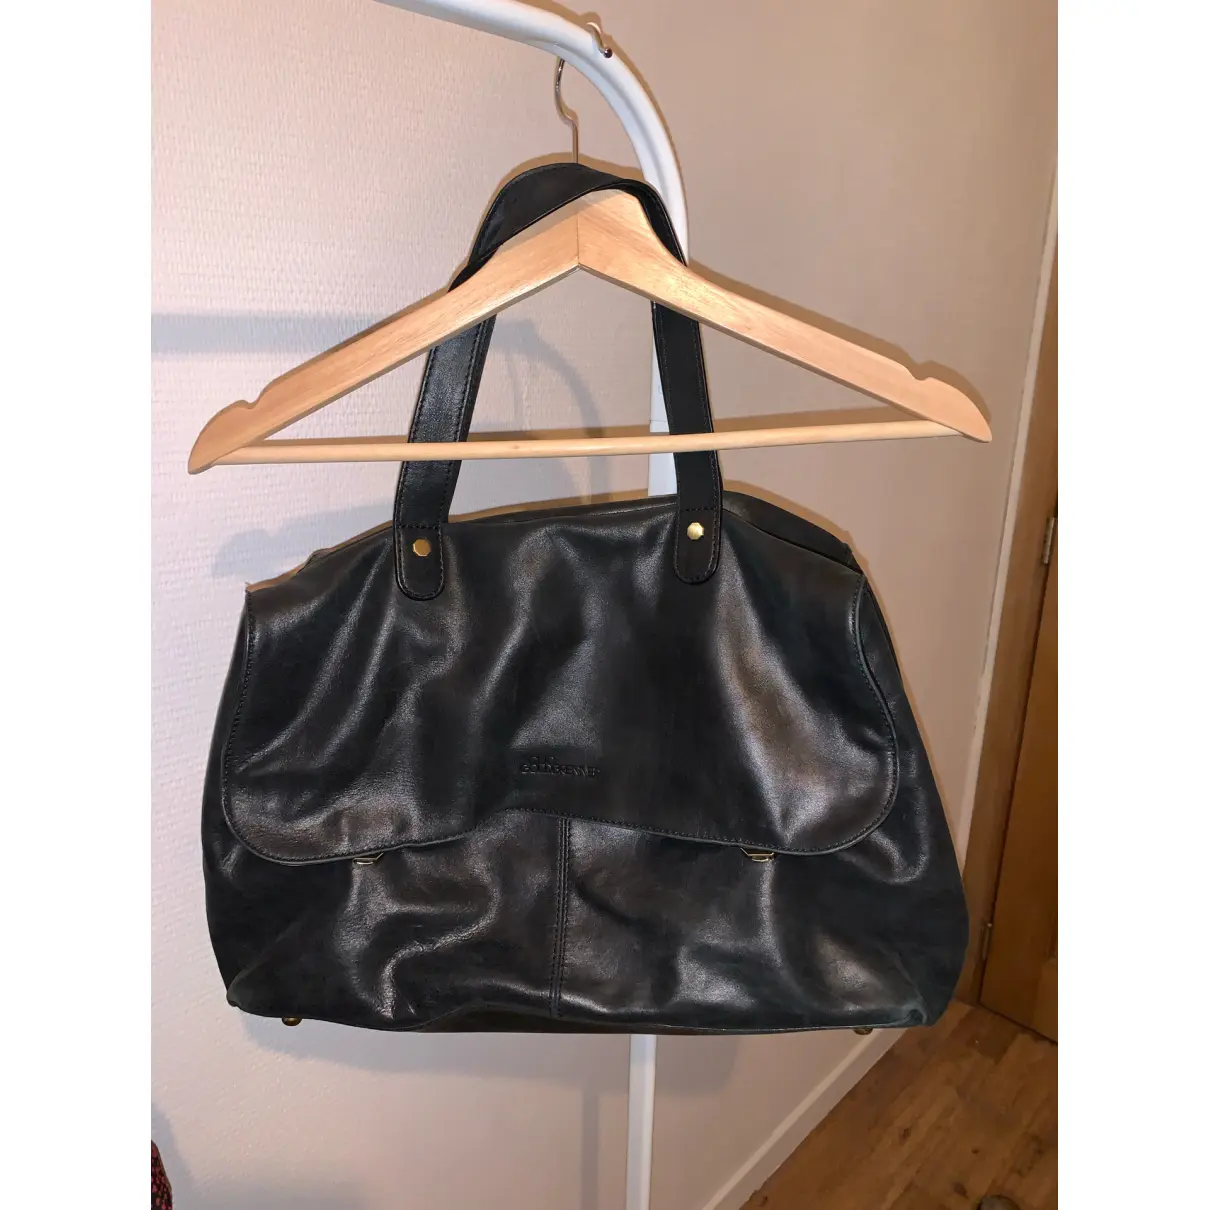 Buy CLIO GOLDBRENNER Leather tote online